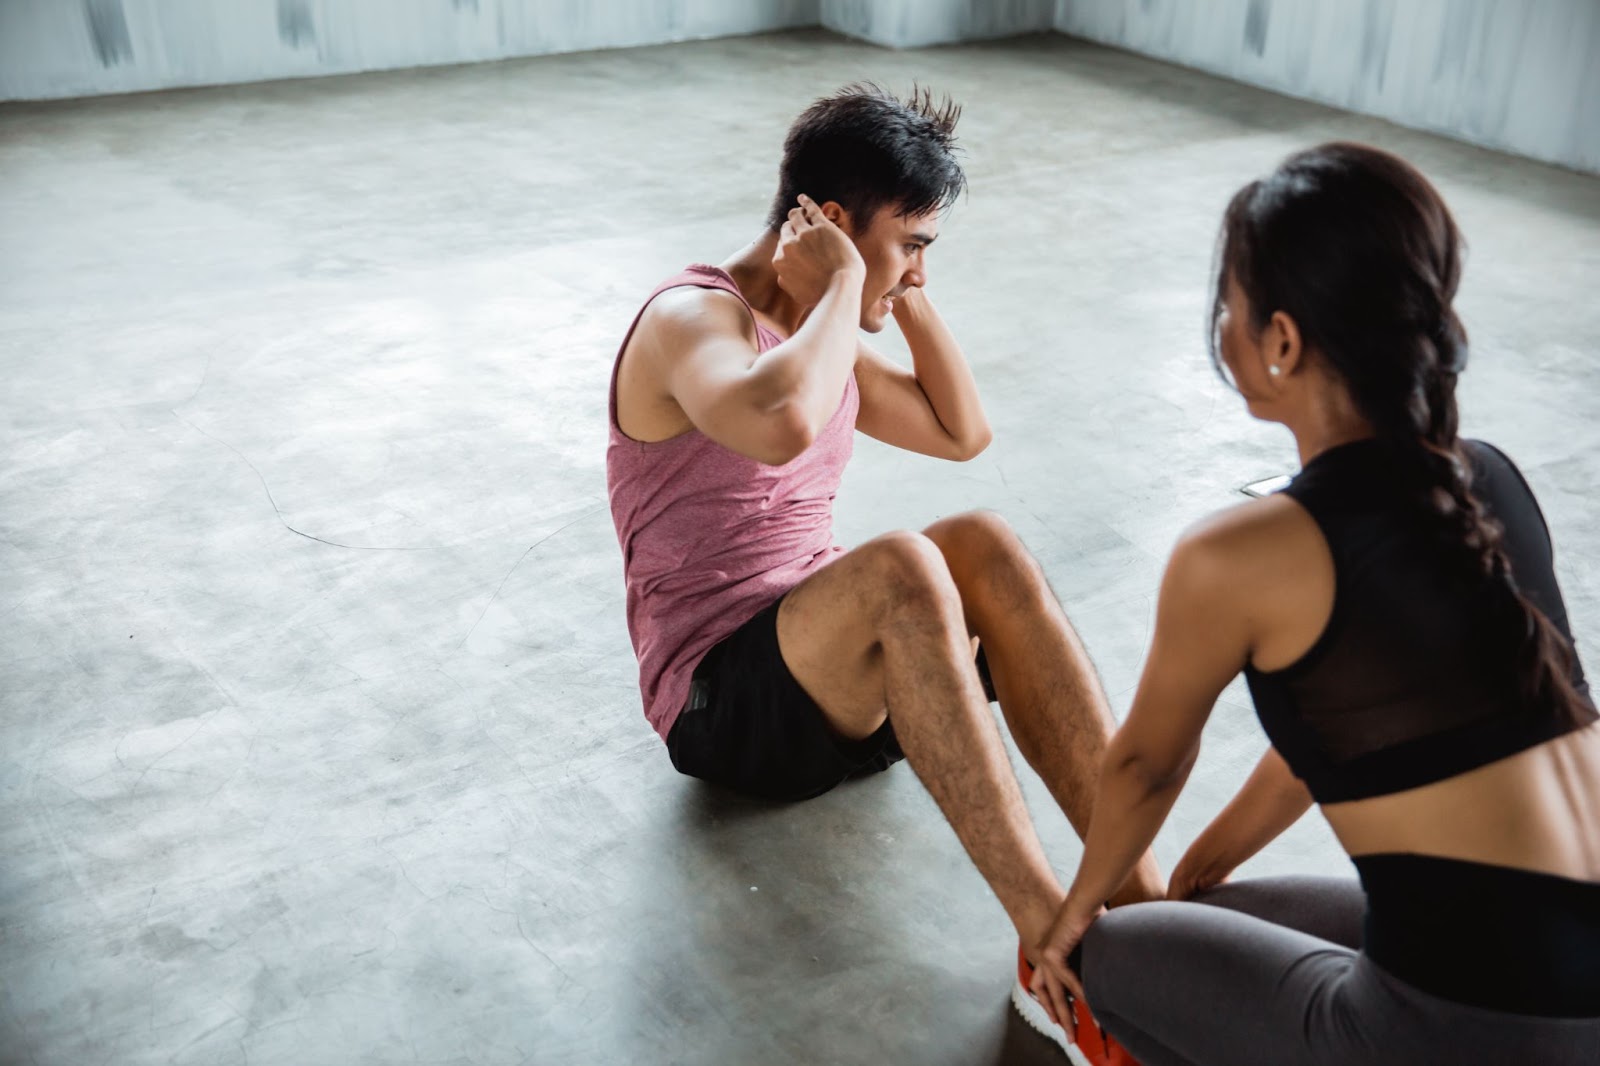 Couples doing sit ups together, woman holding man’s ankles